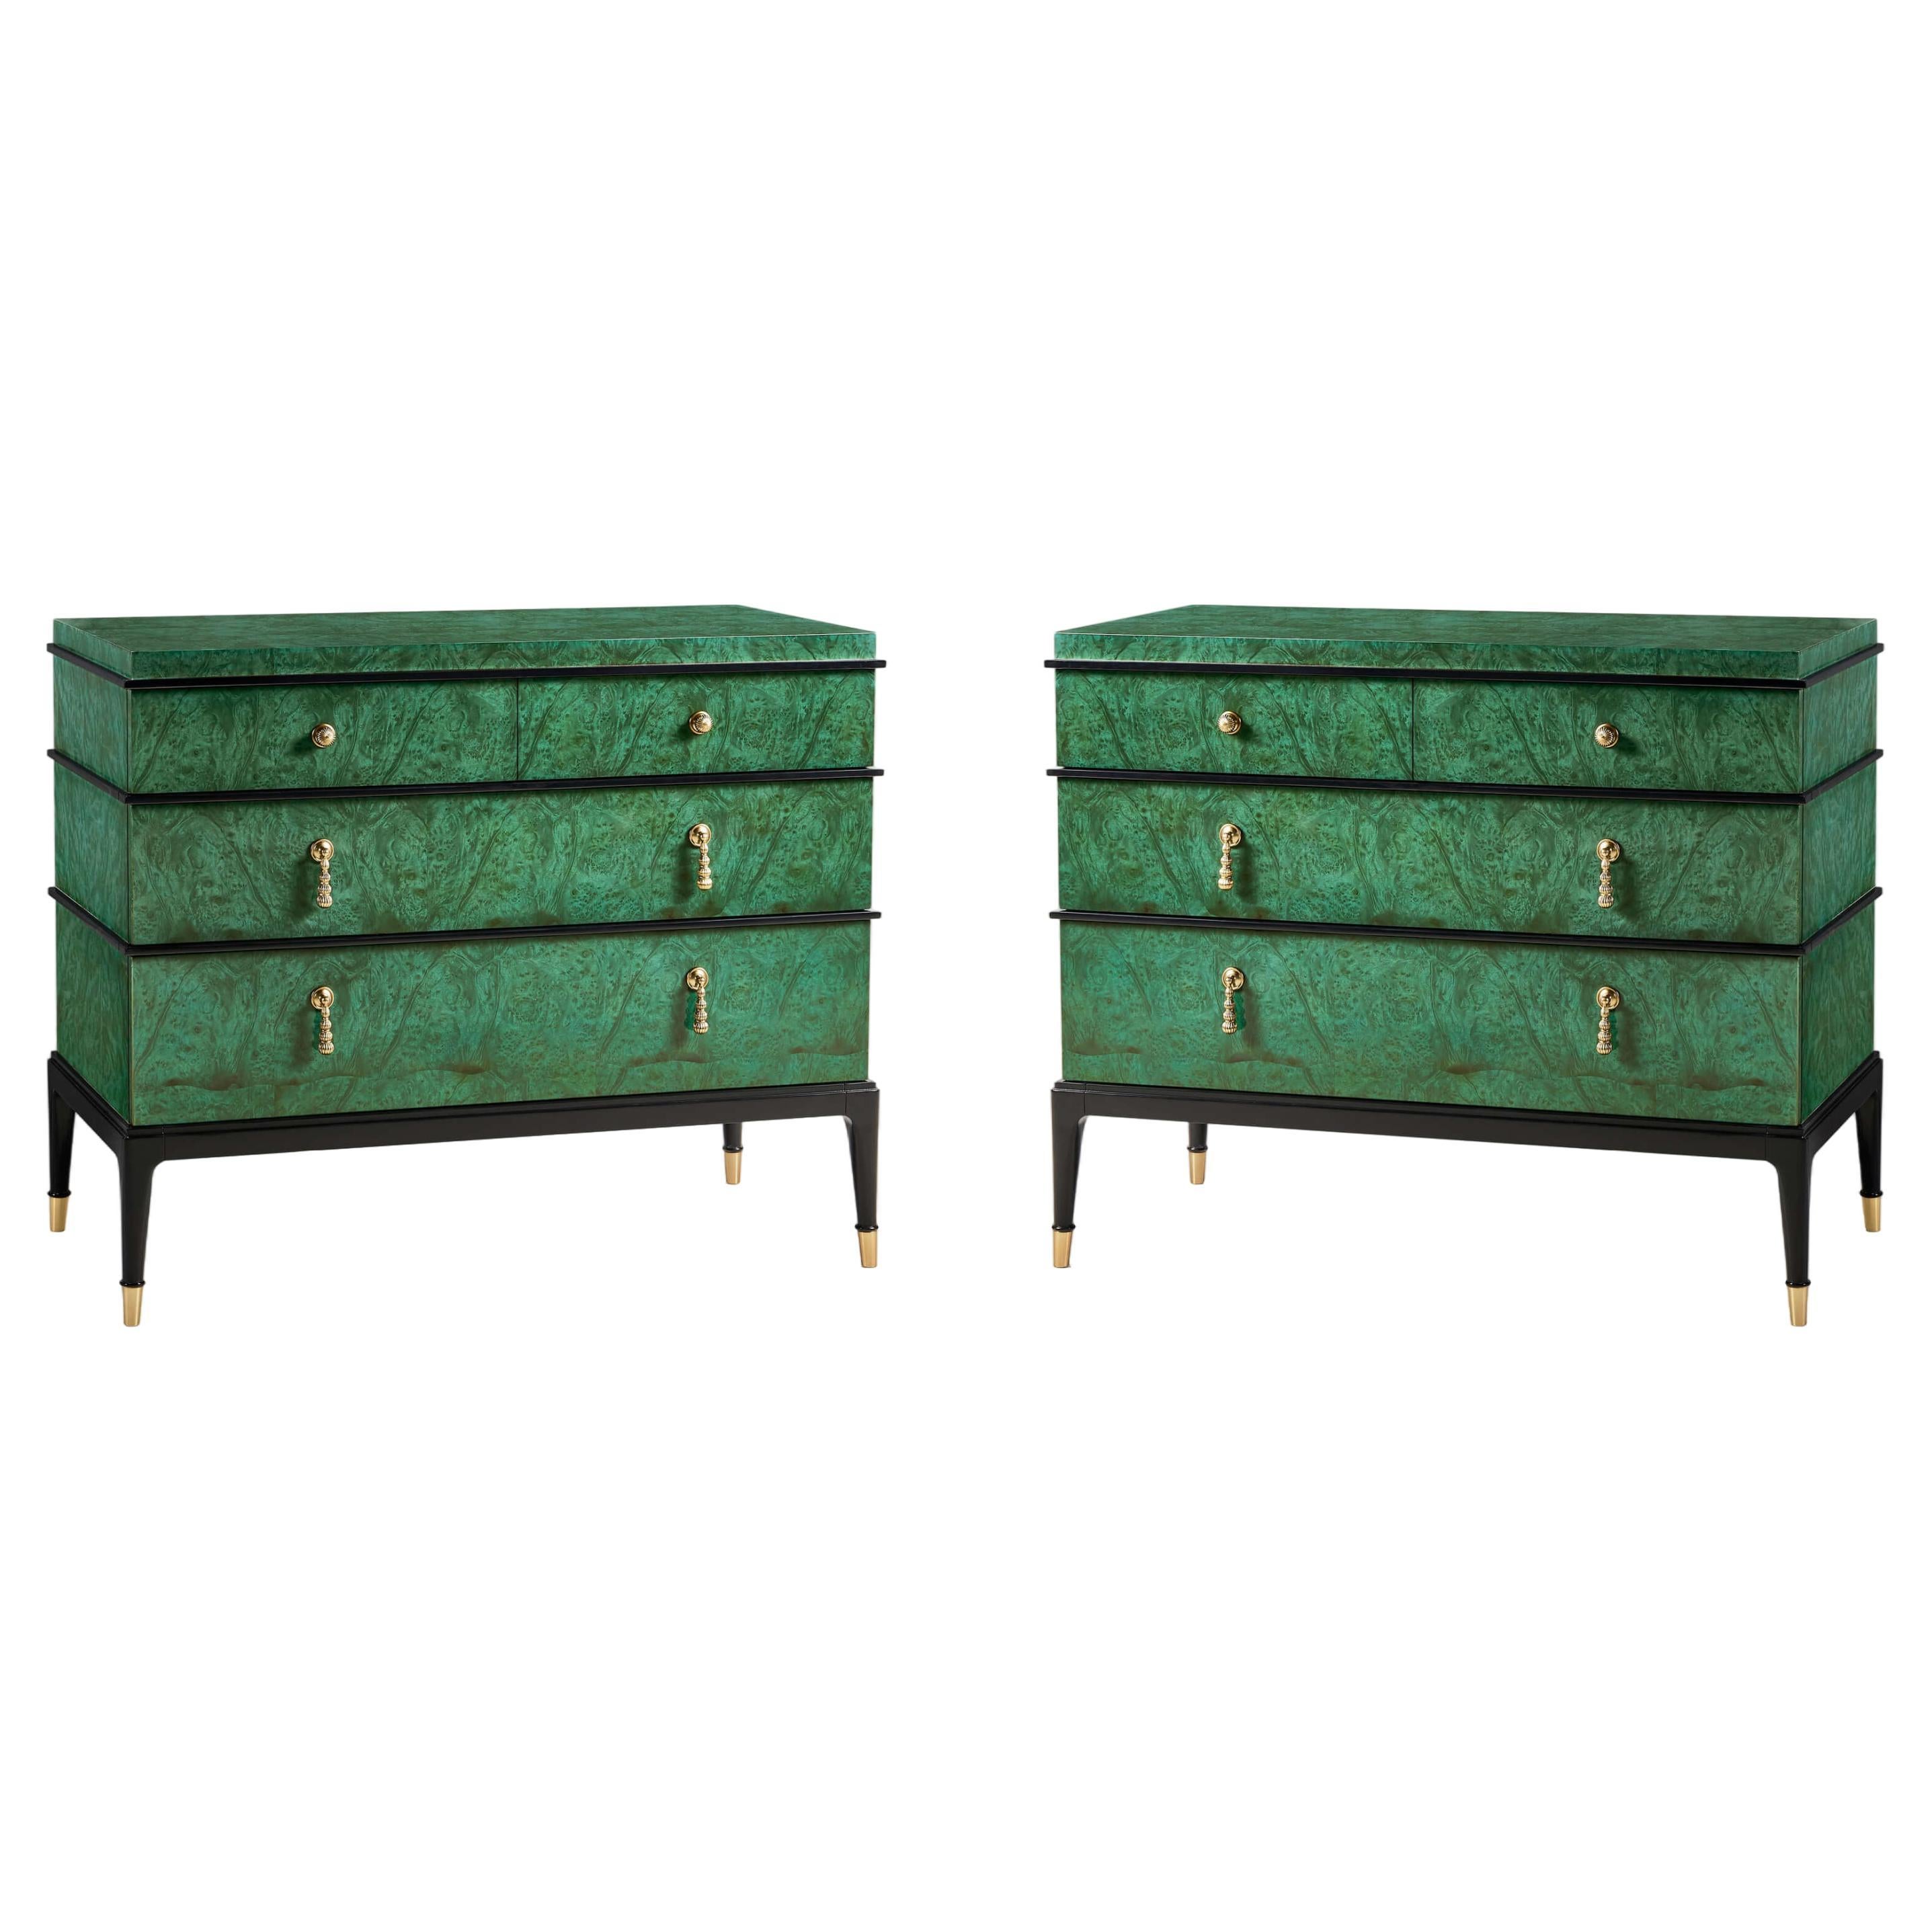 Pair of Emerald Art Deco Style Burl Wood Dressers For Sale